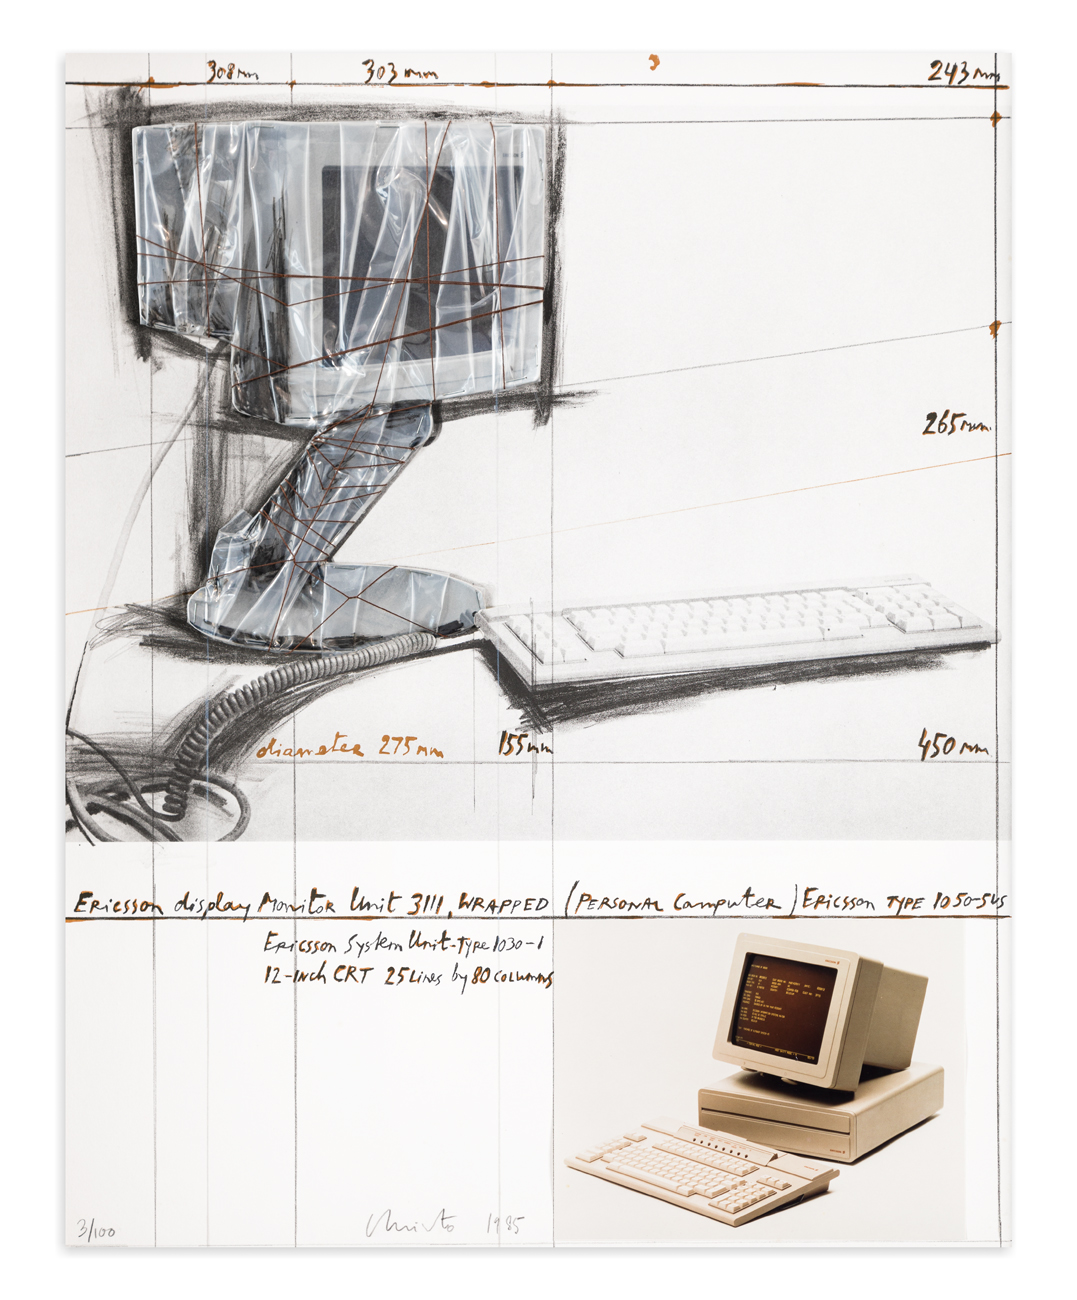 CHRISTO (1935-2020) - Ericsson Display Monitor Unit 3111, Wrapped, Project for Personal Computer, 1985